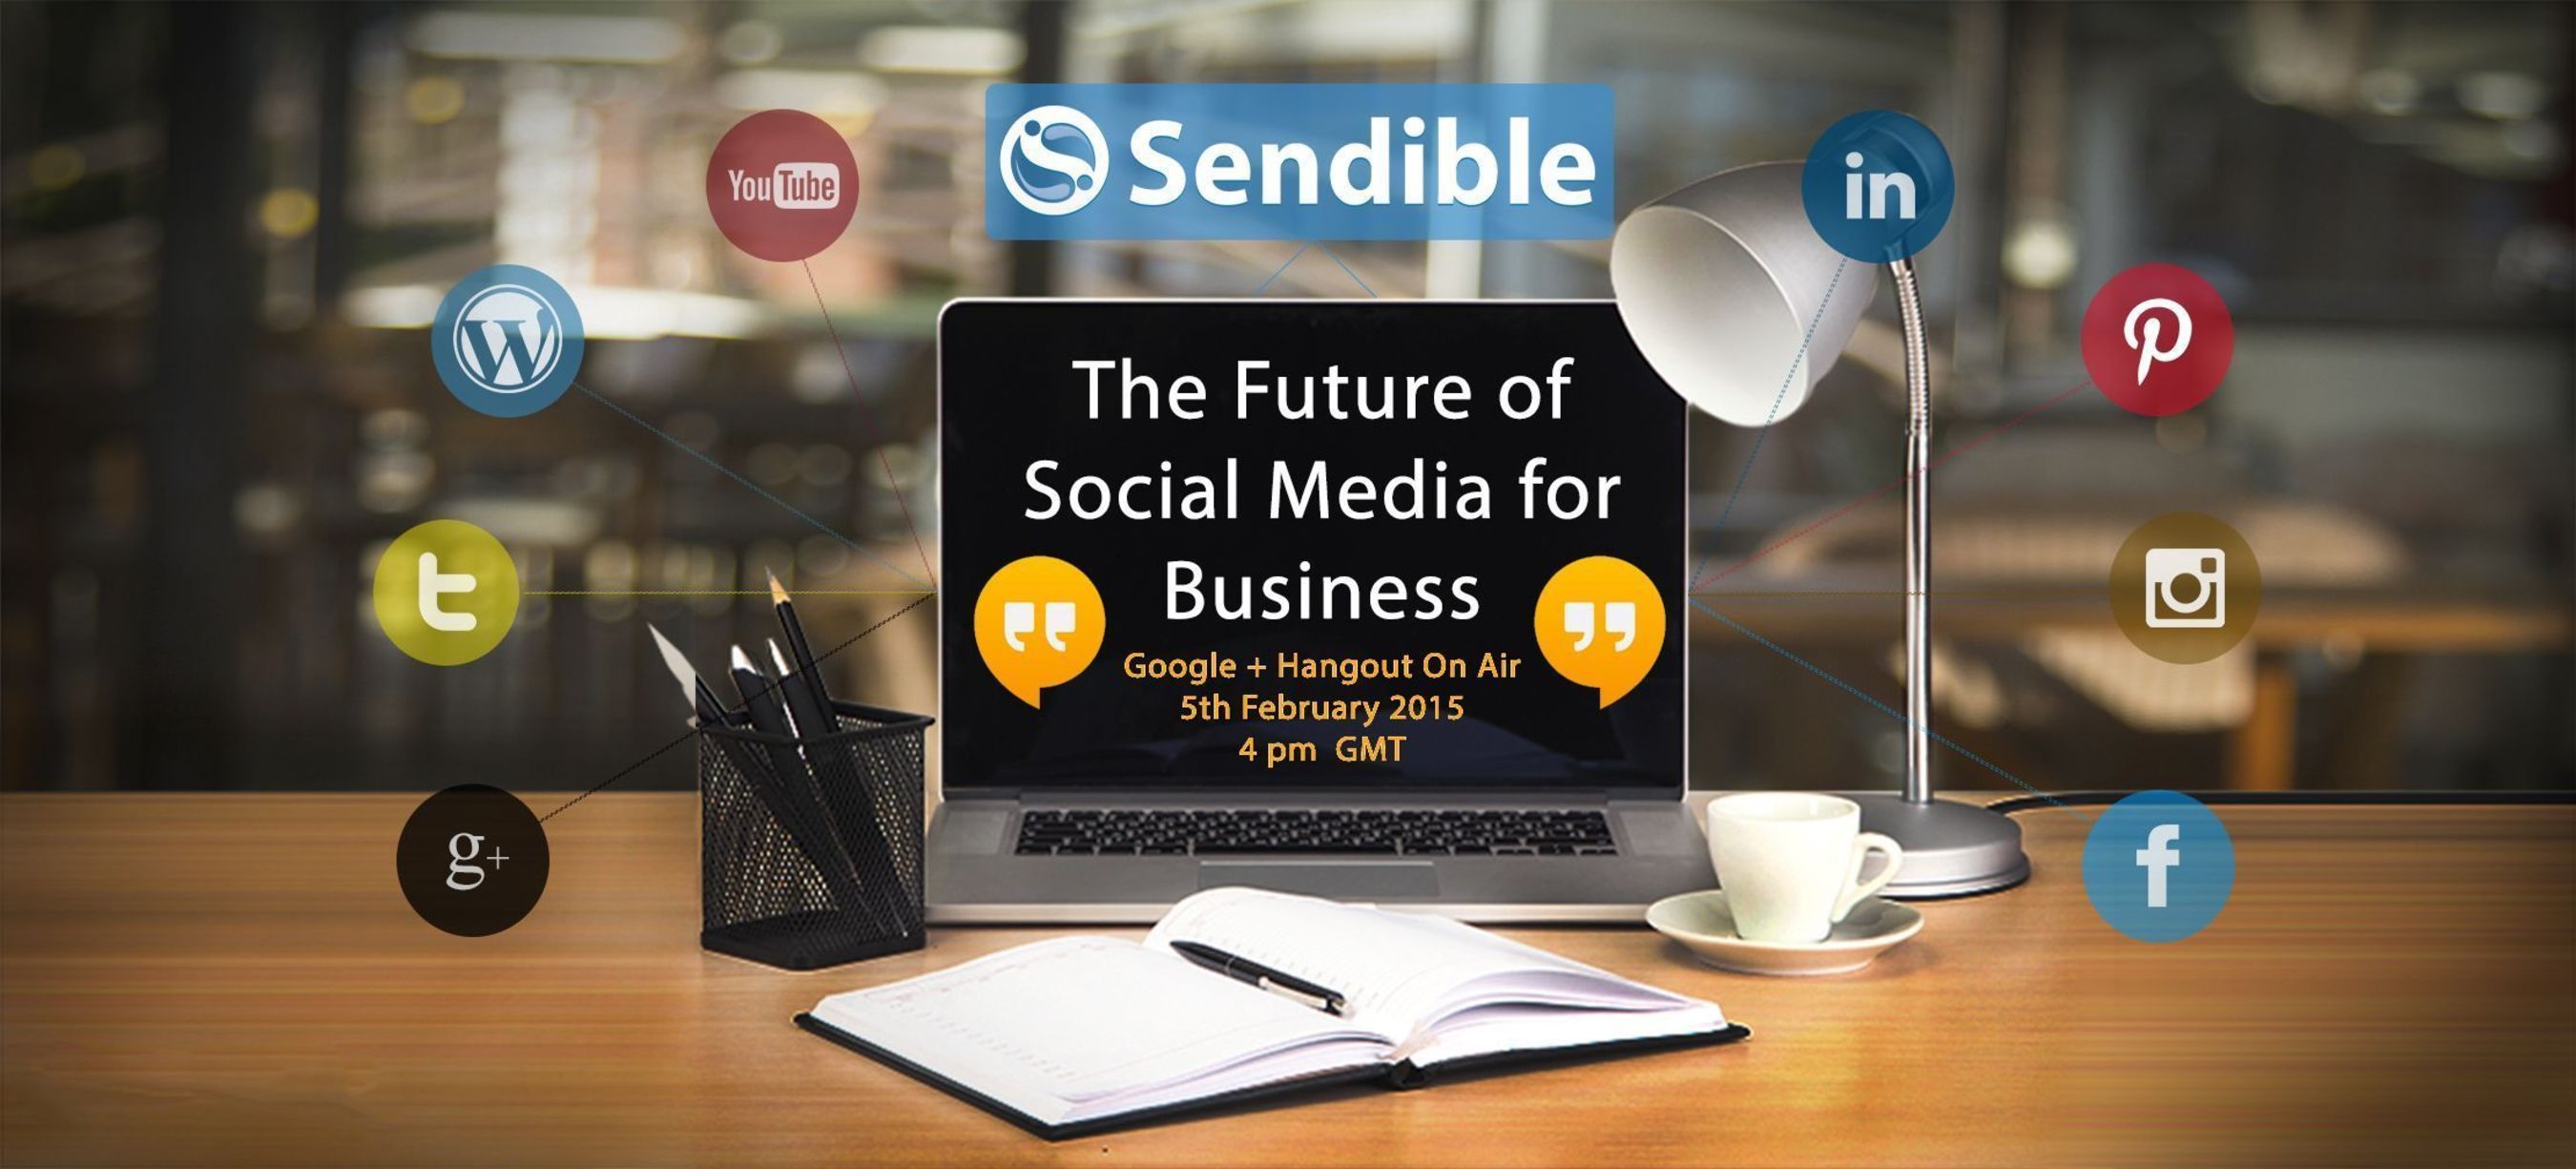 The Future of Social Media for Business is a live online event being hosted by Sendible the leading social media management solution provider. The event will bring together leaders from the world of social media and marketing to discuss what the future holds for social media for business, being held on 5th Feb 2015 at 16:00 GMT. Register at www.sendible.com/FSMB2015 (PRNewsFoto/Sendible Ltd_)